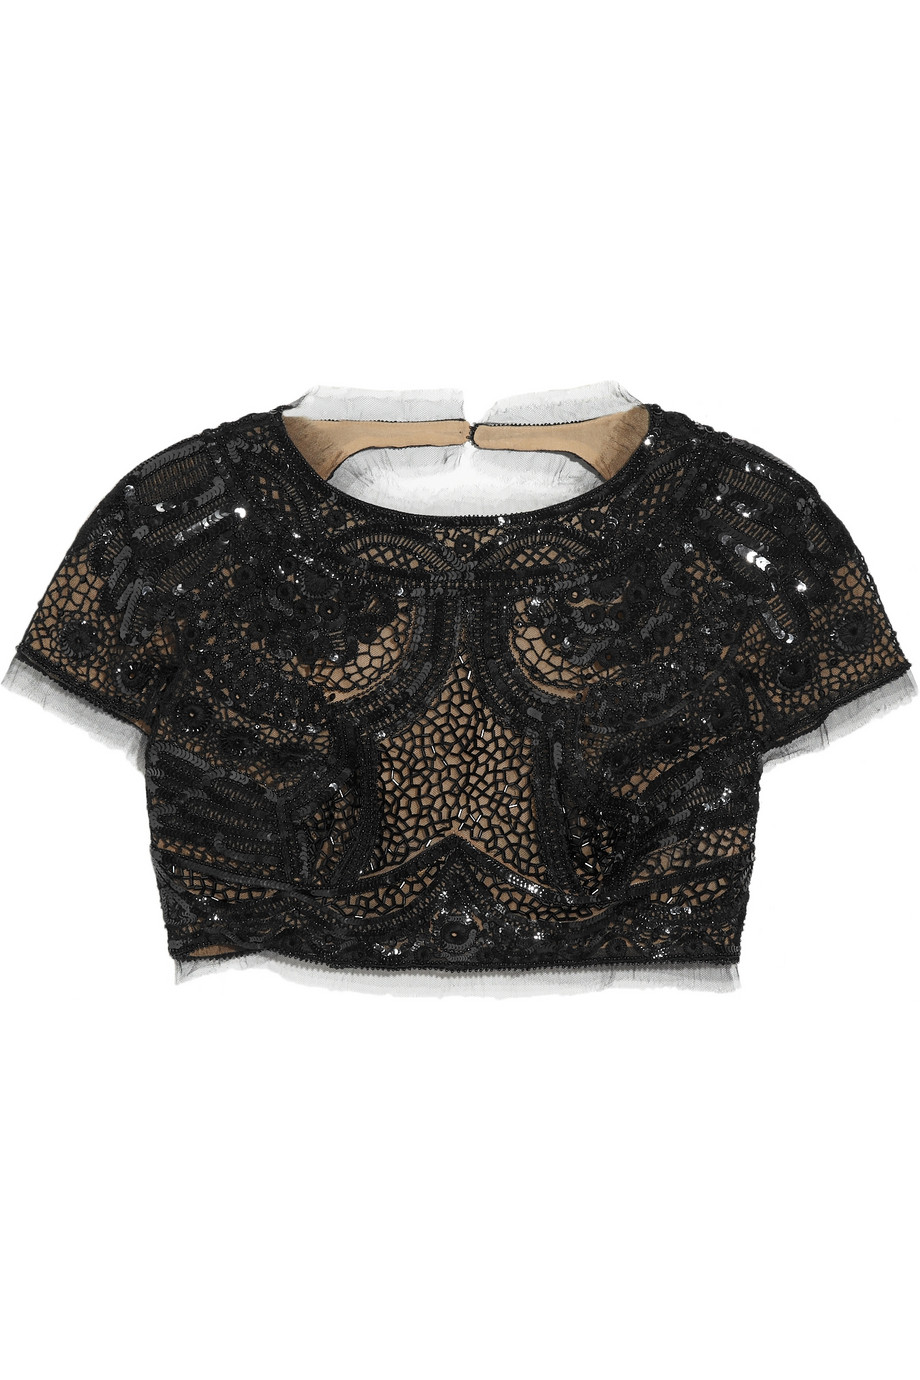 Emilio Pucci Sequined Tulle Cropped Top in Black - Lyst